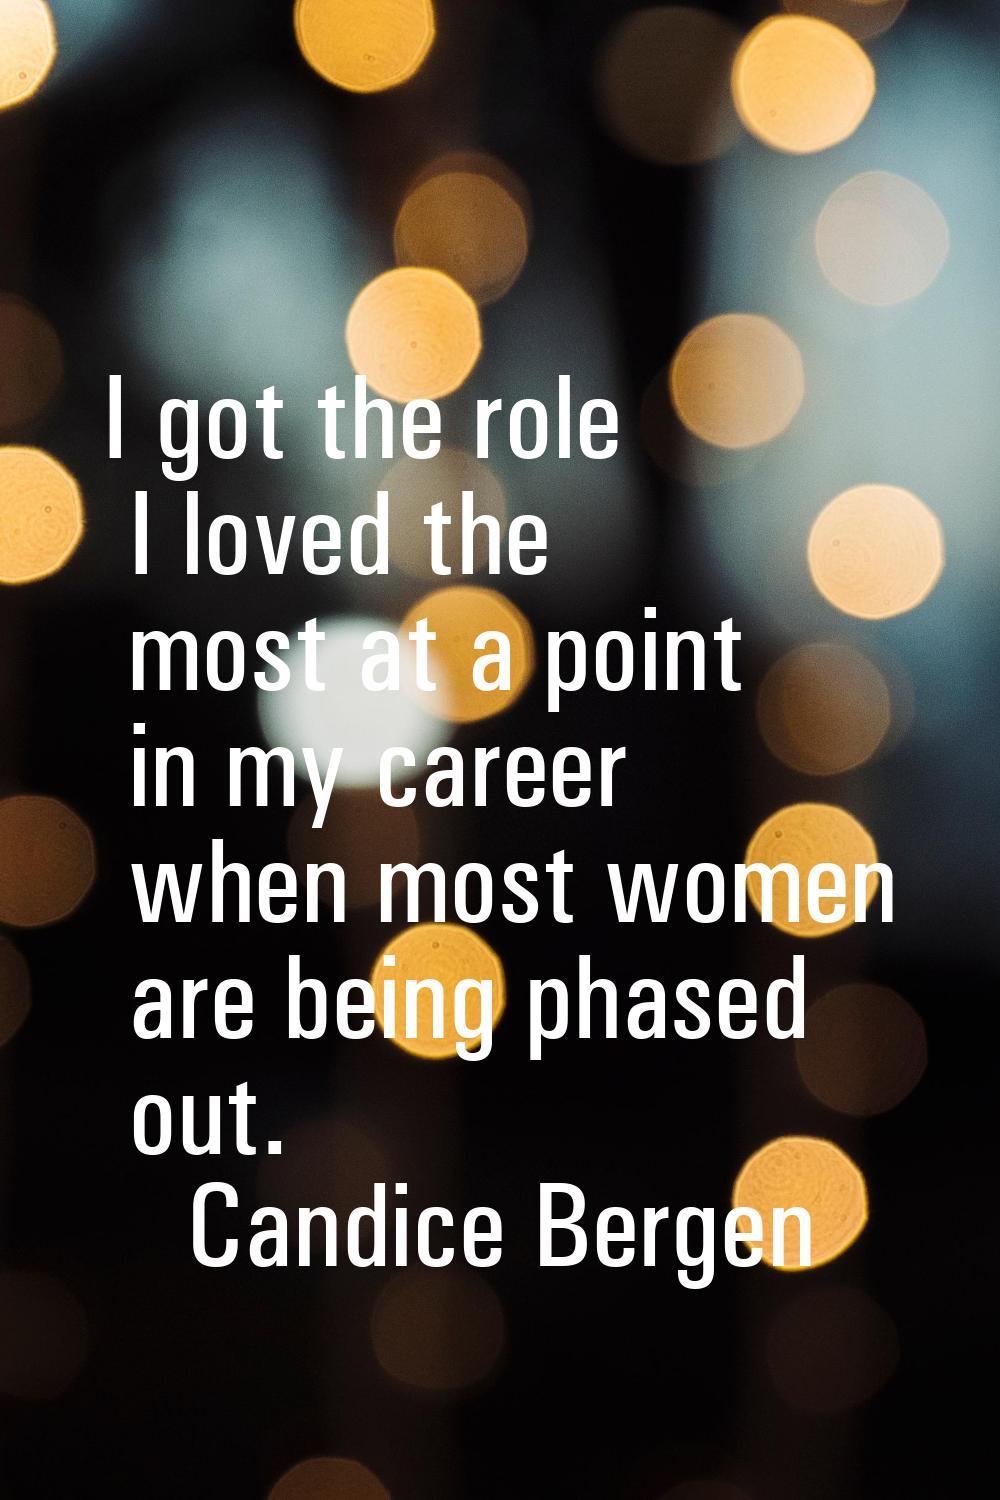 I got the role I loved the most at a point in my career when most women are being phased out.